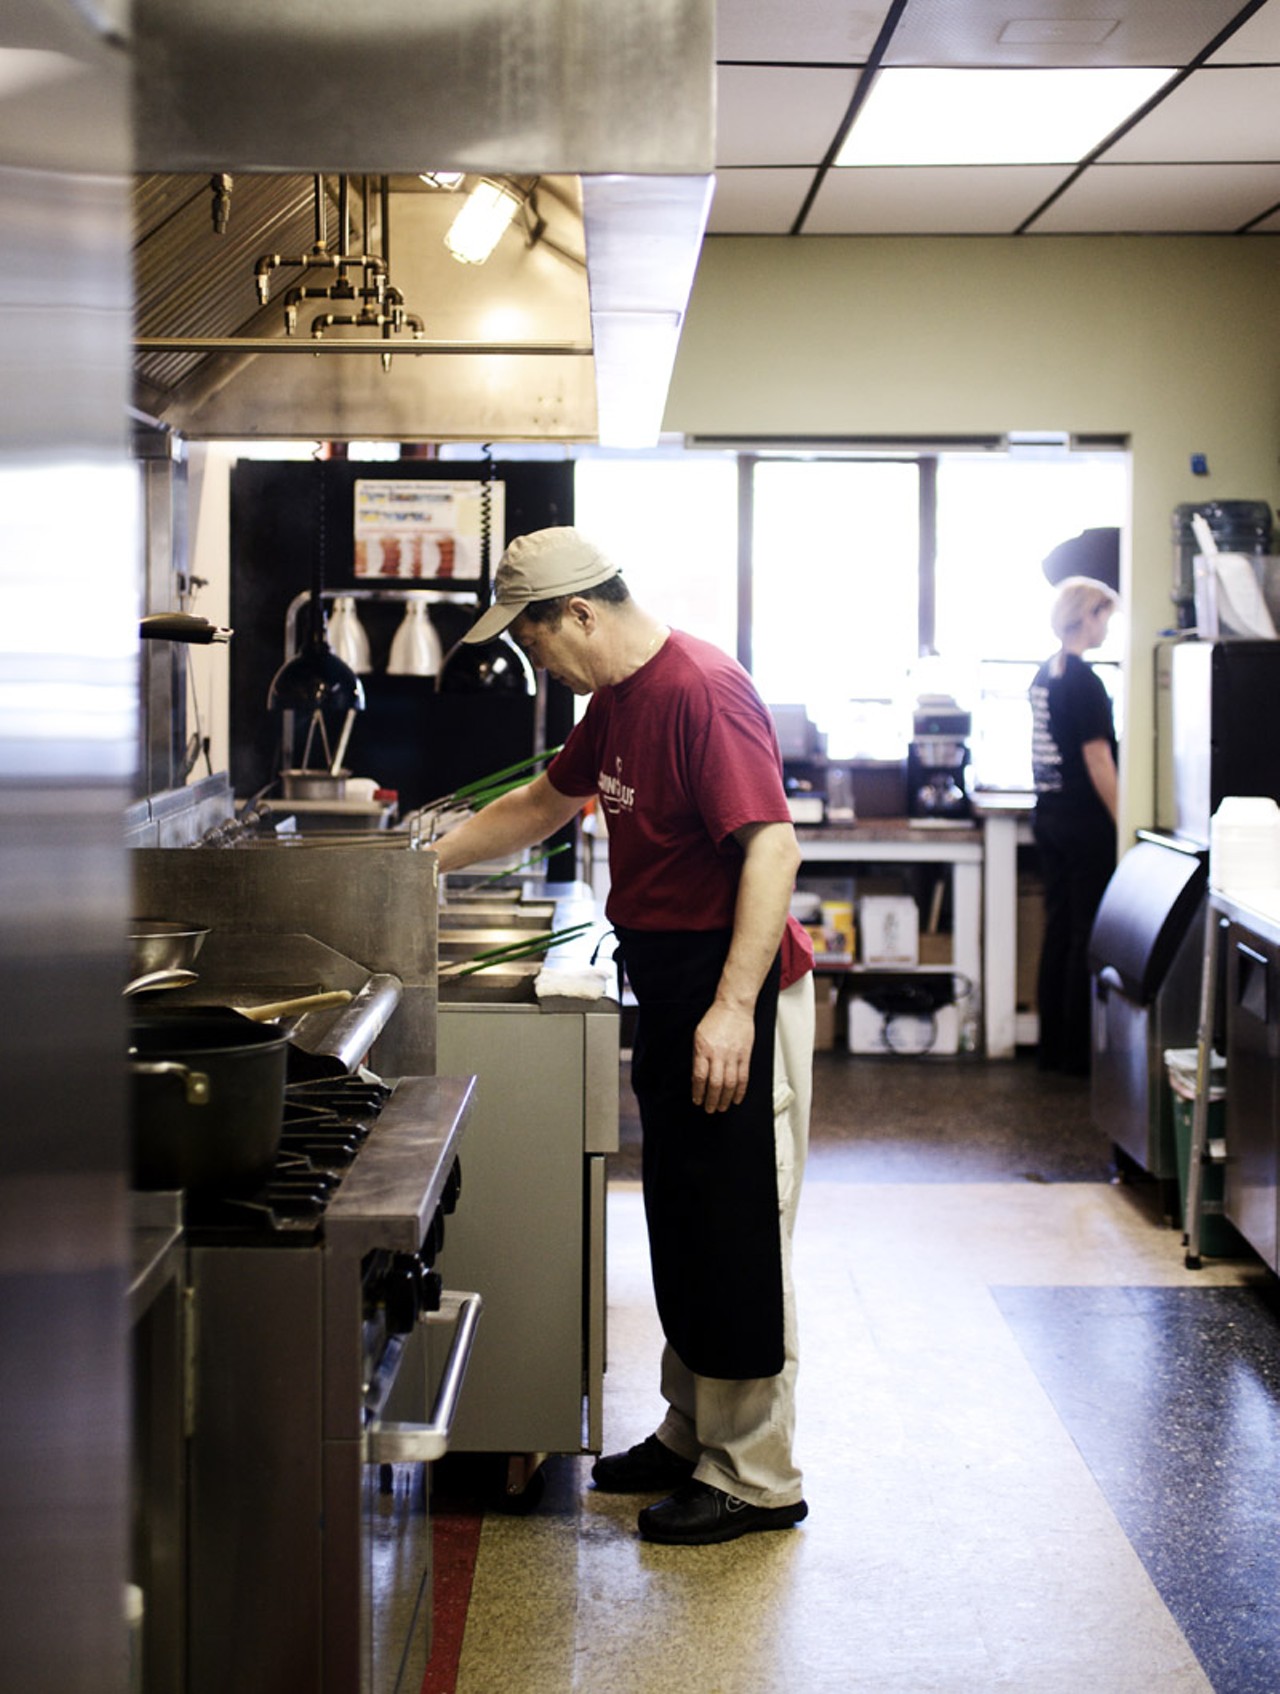 Owner Steve Song at work in the kitchen of O! Wing Plus in Overland, Missouri.